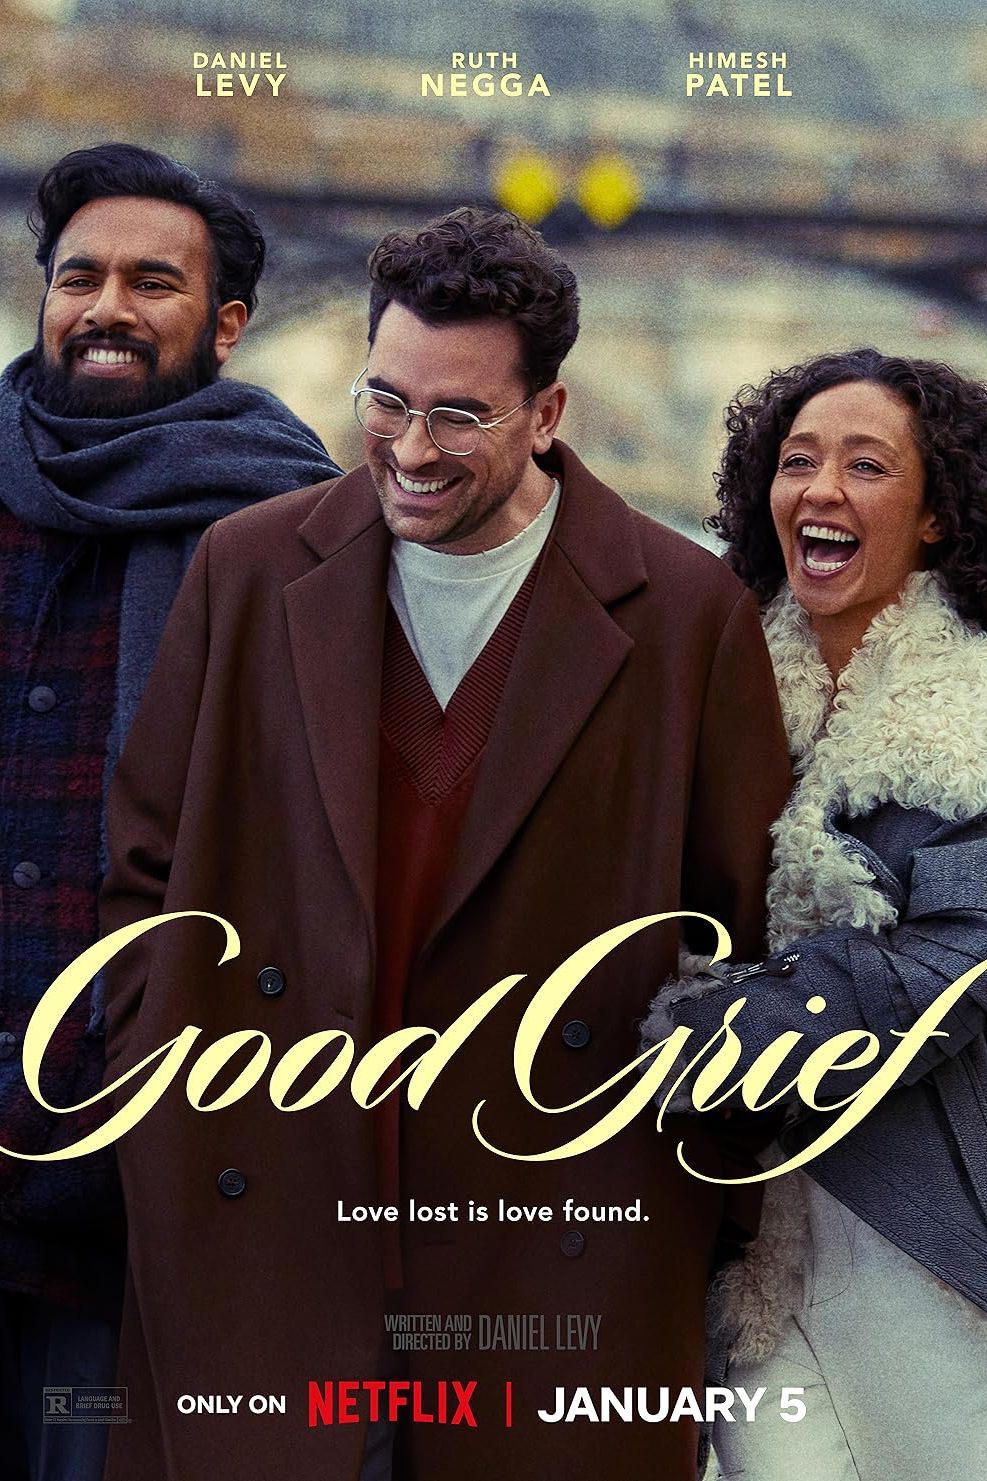 Good Grief Review Dan Levy’s Directorial Debut Is A Mixed Bag